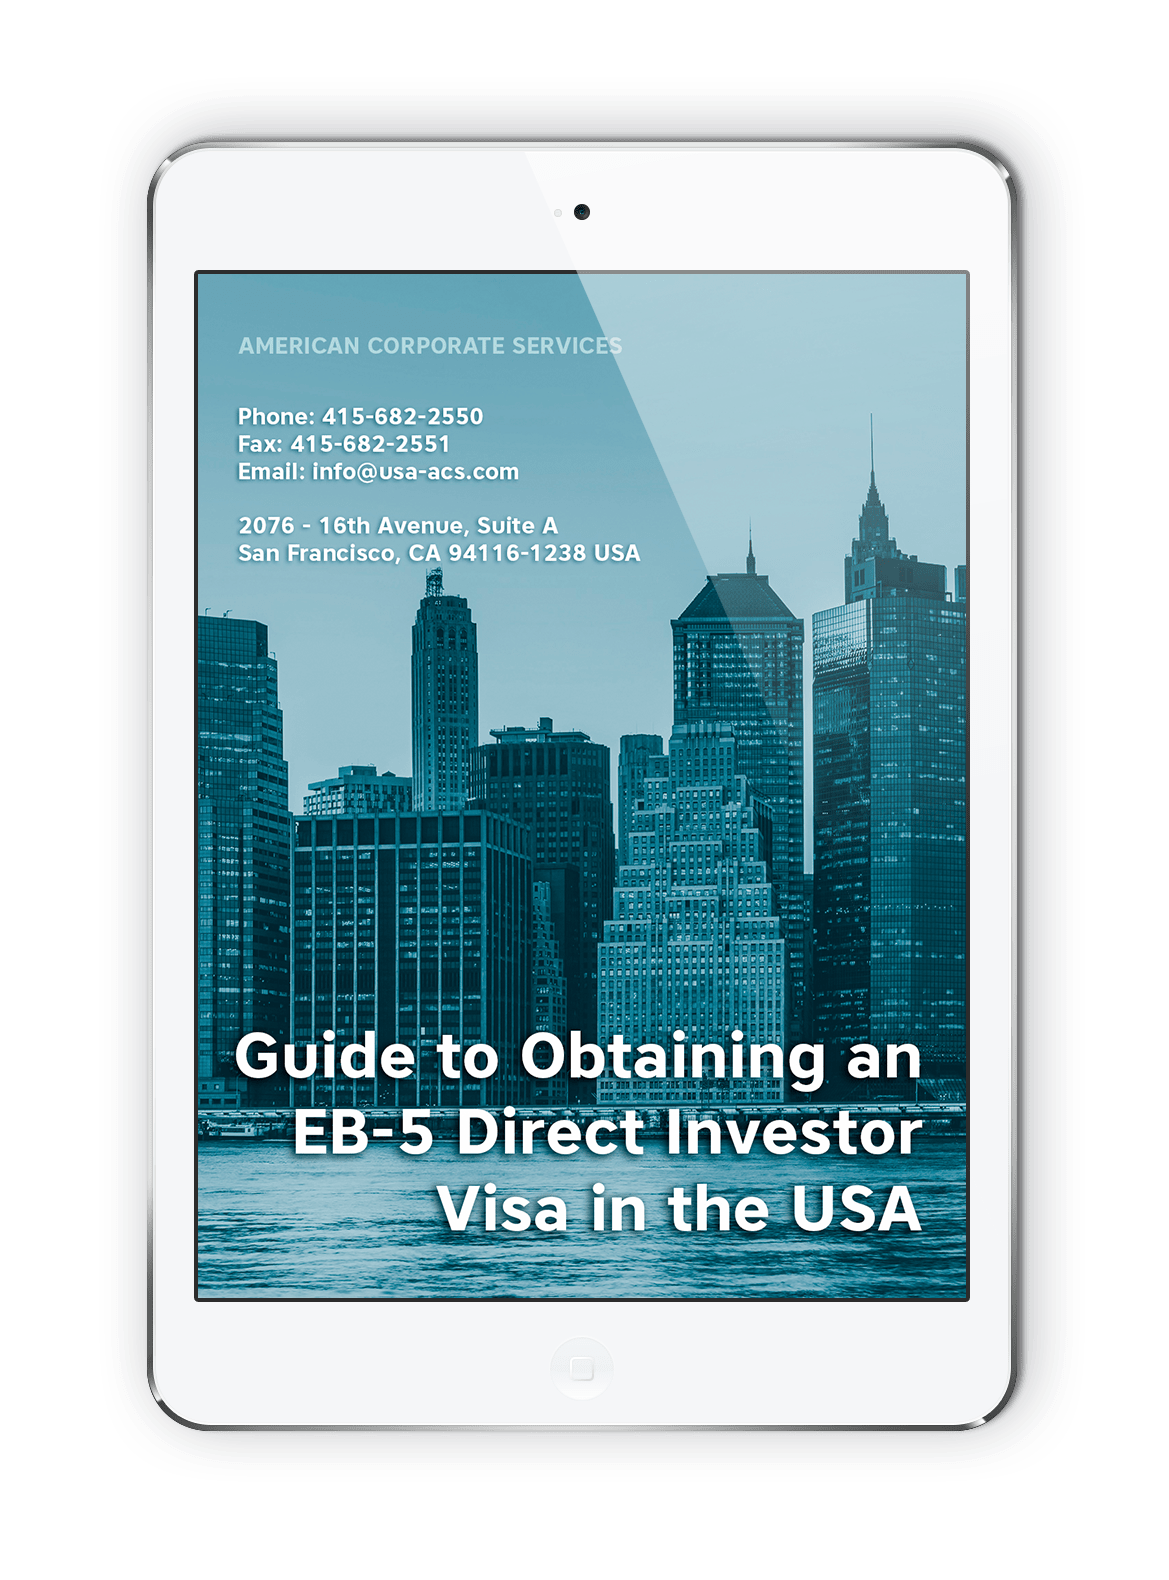 Guide to Obtaining an EB-5 Direct Investor Visa in the USA